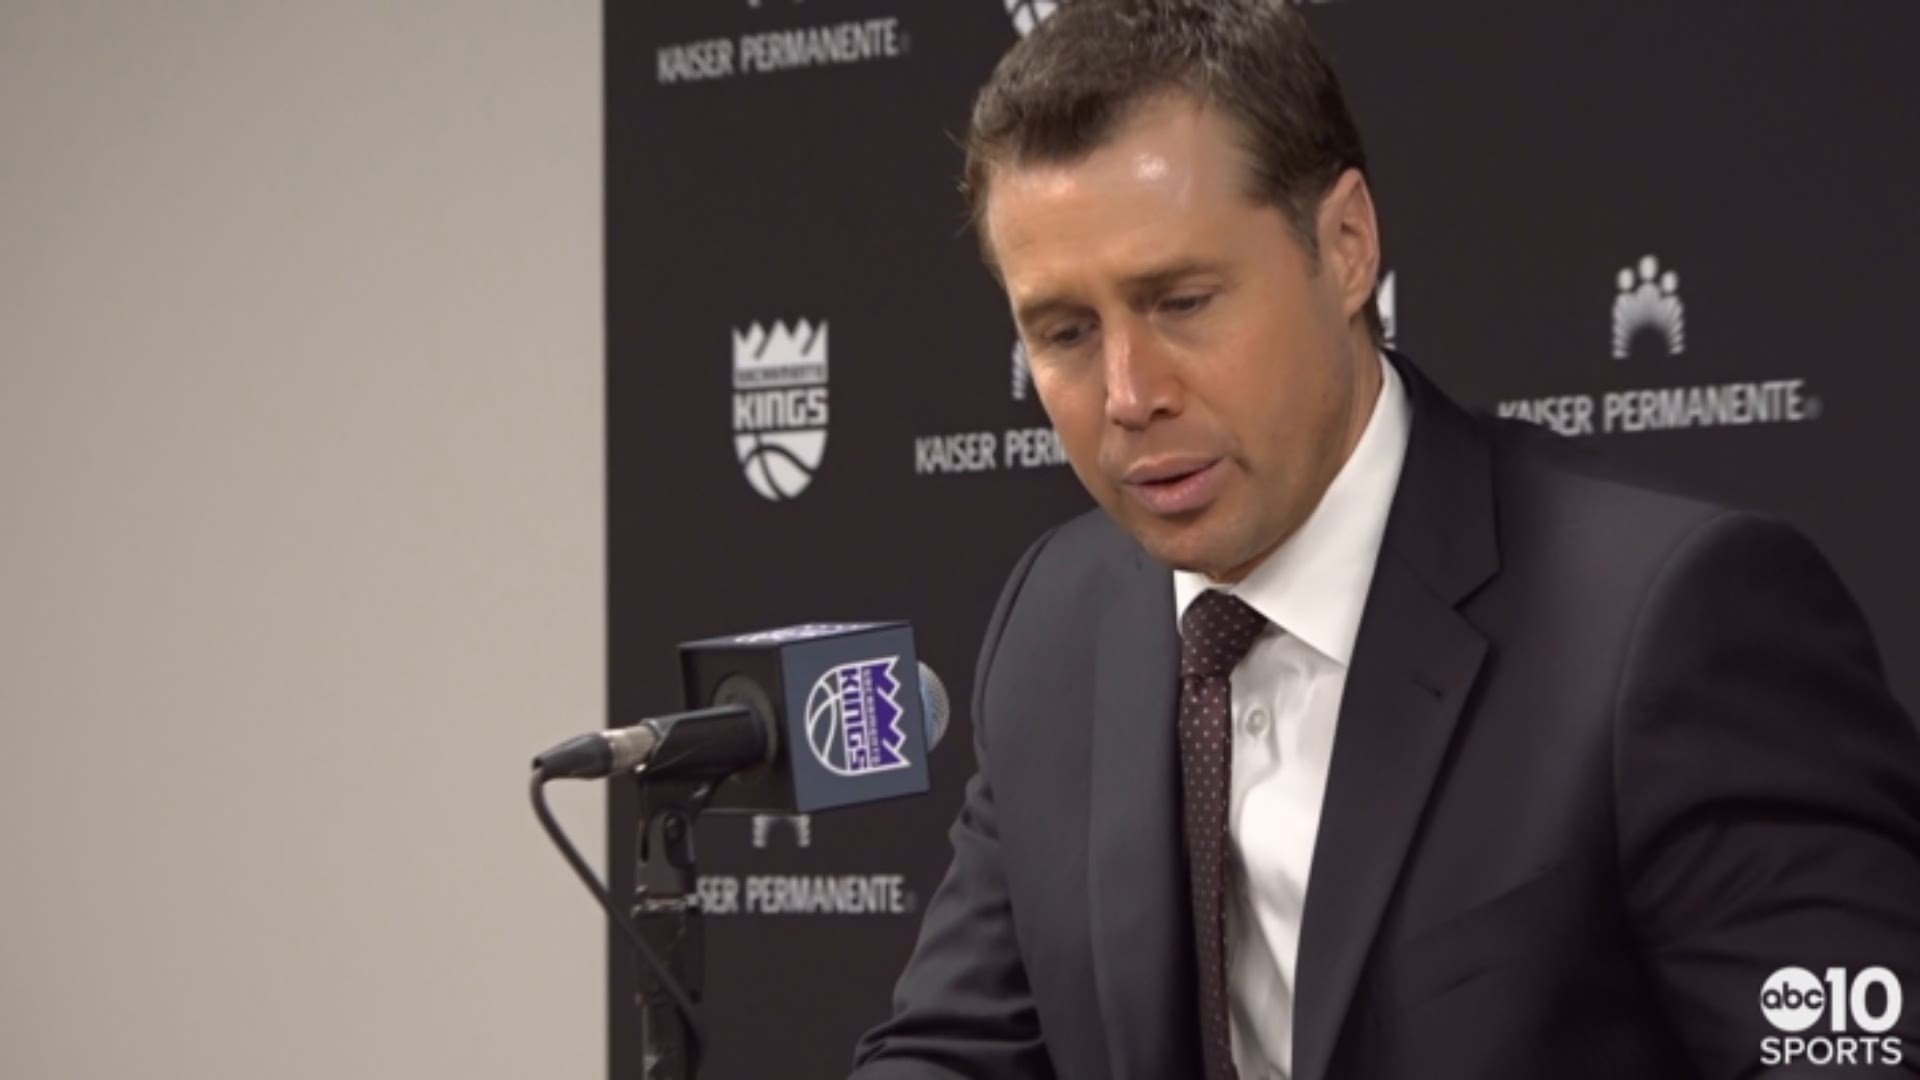 Following Monday's decisive victory over the Orlando Magic, Kings head coach Dave Joerger discusses snapping the four-game losing streak, the return of Marvin Bagley III from injury and looks ahead to Tuesday's game in Phoenix.